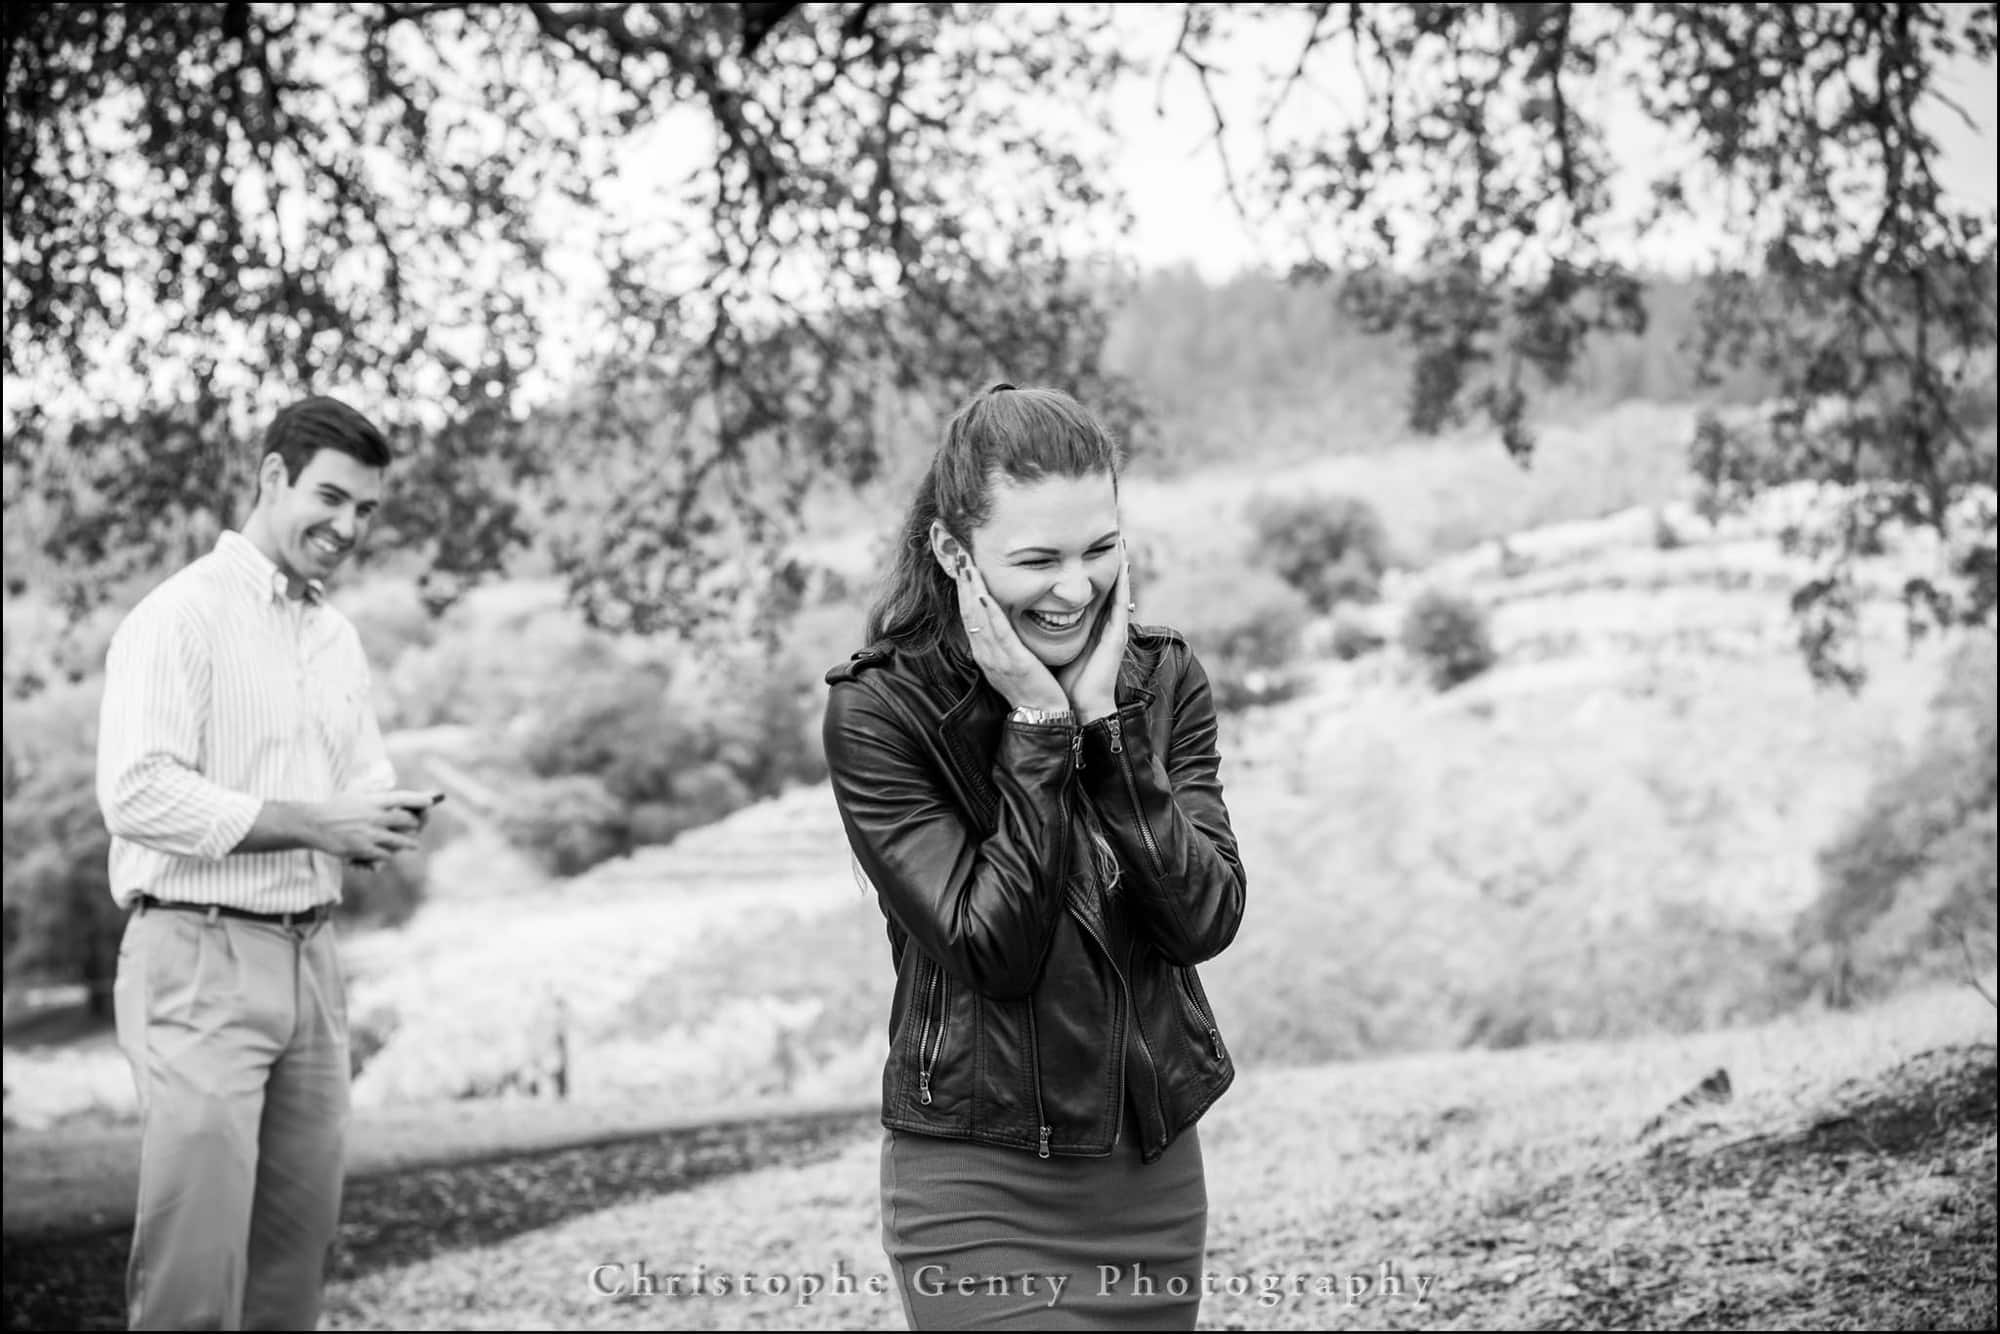 Marriage Proposal Photography in The Napa Valley - Buehler Vineyards, St Helena, CA